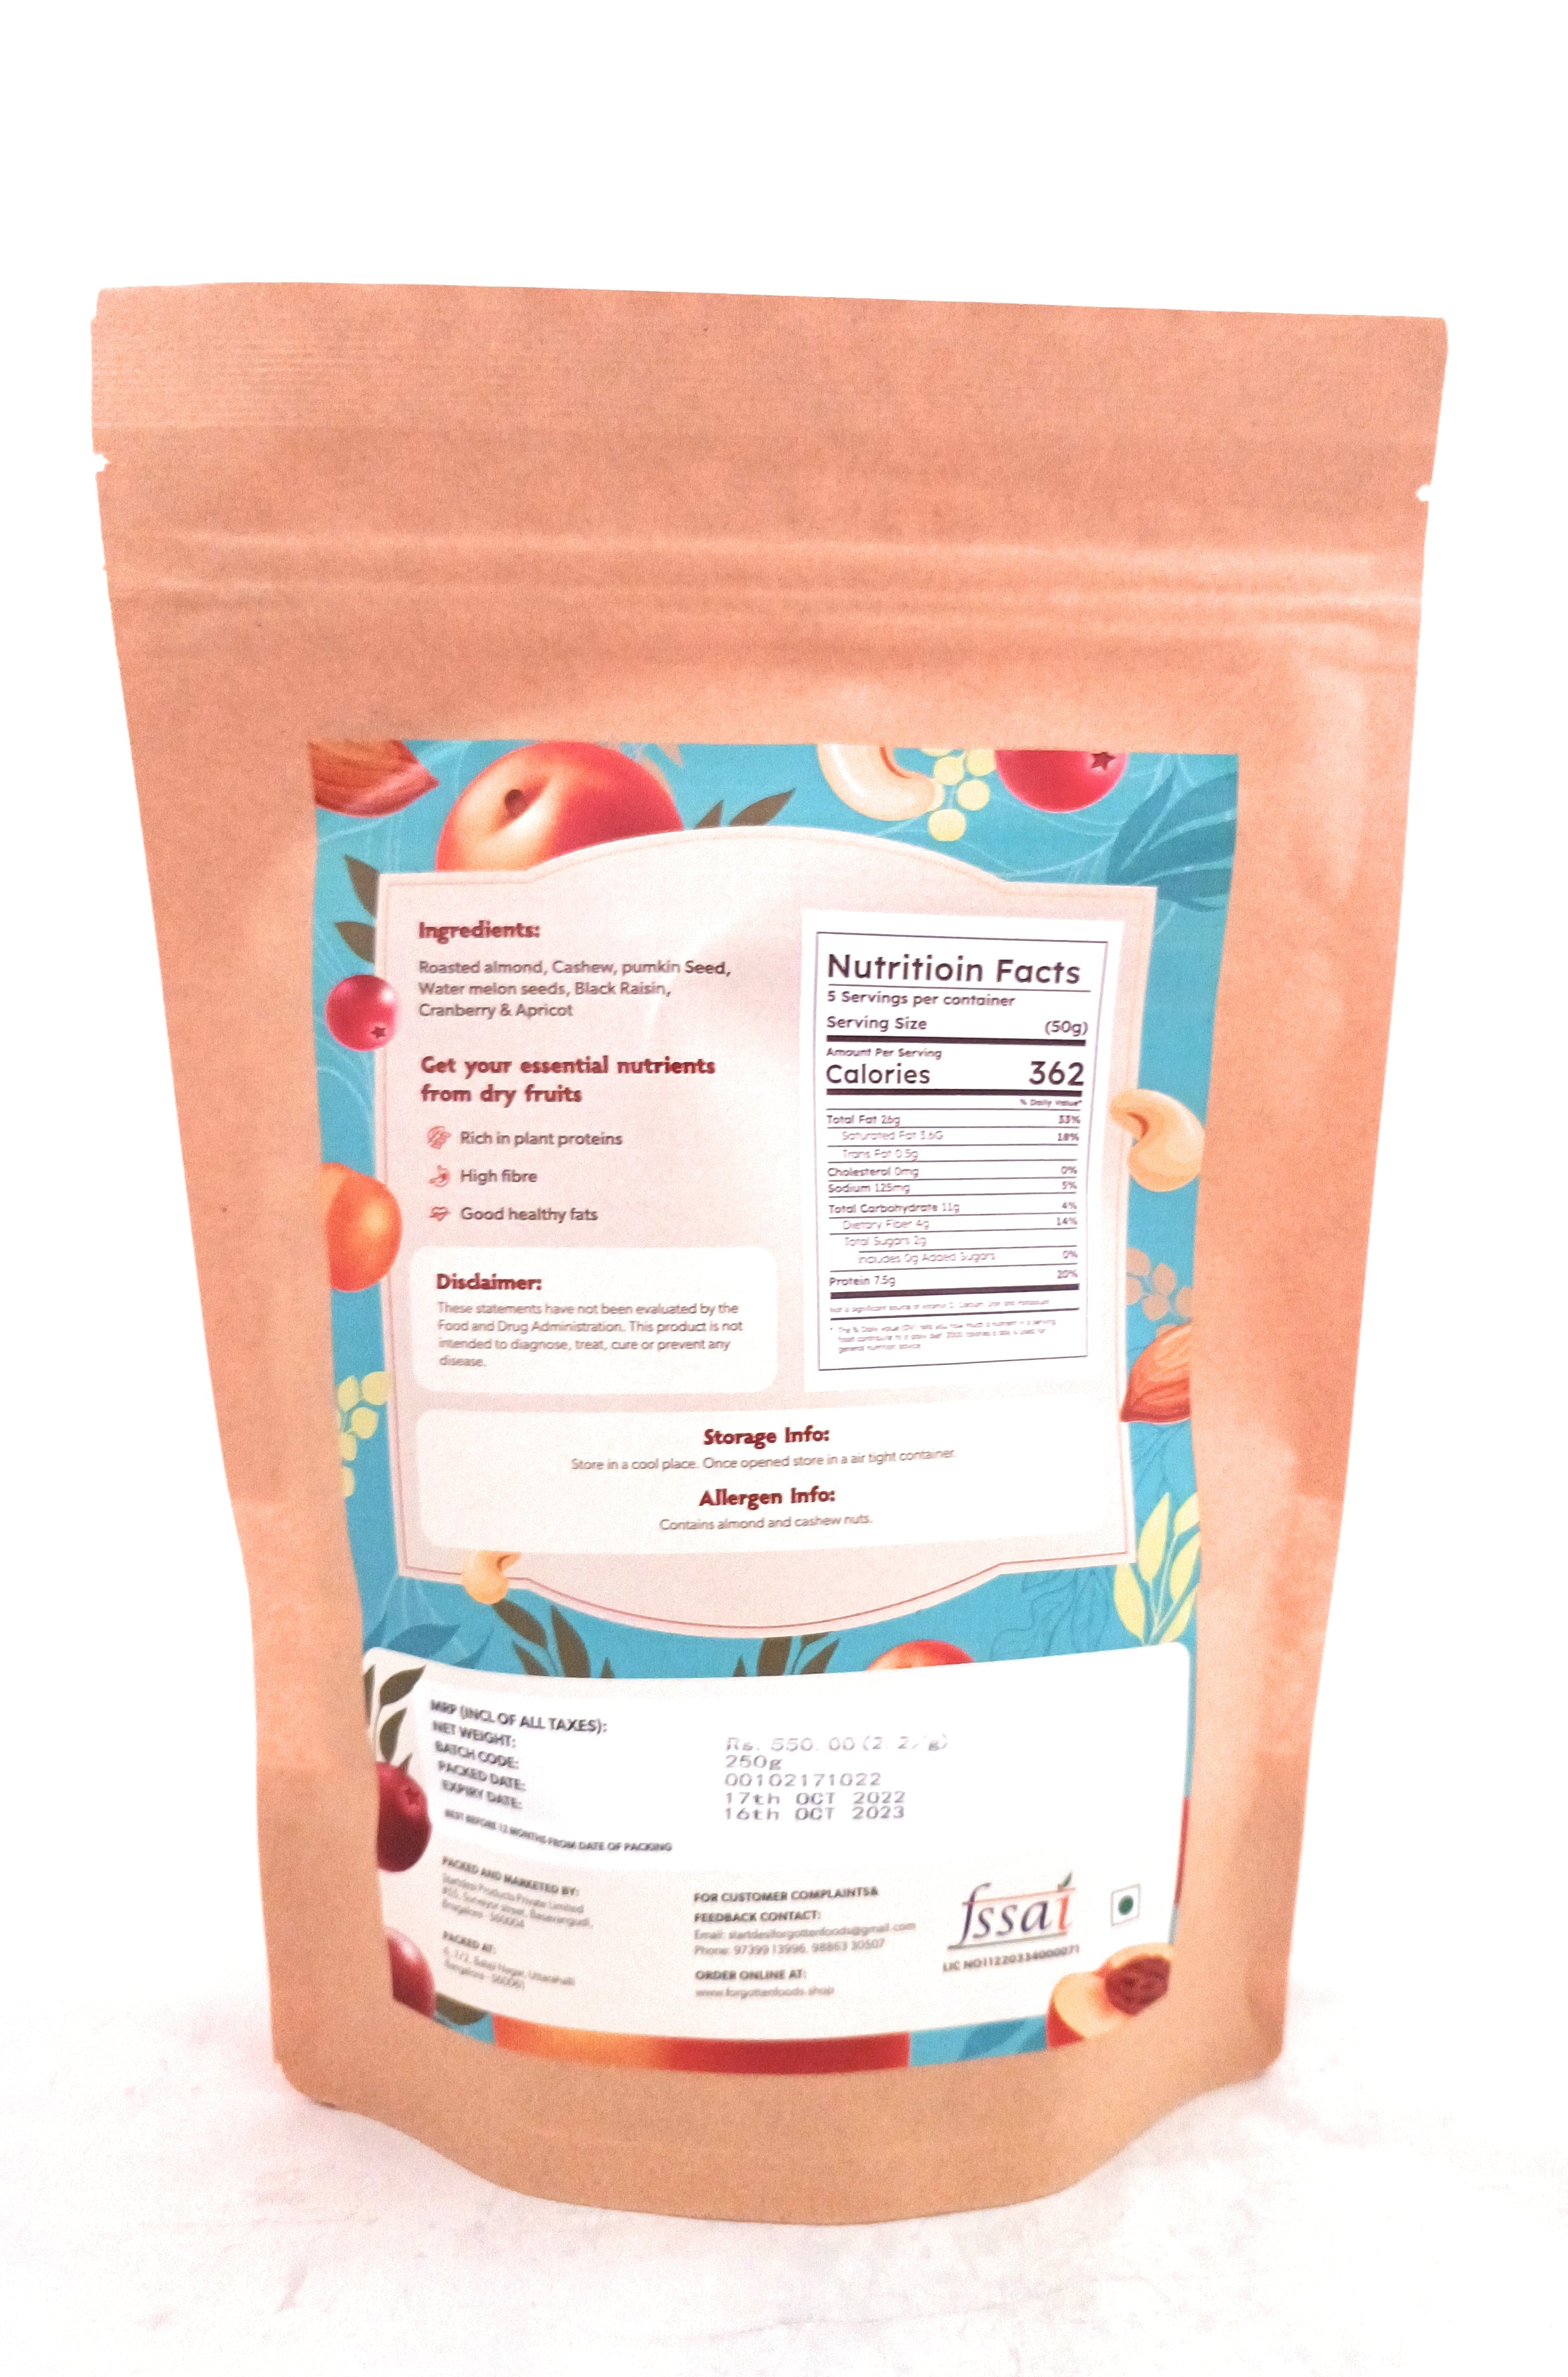 plesantre Apricot & Cranberry Trail Mix with Roasted Nuts and Seeds